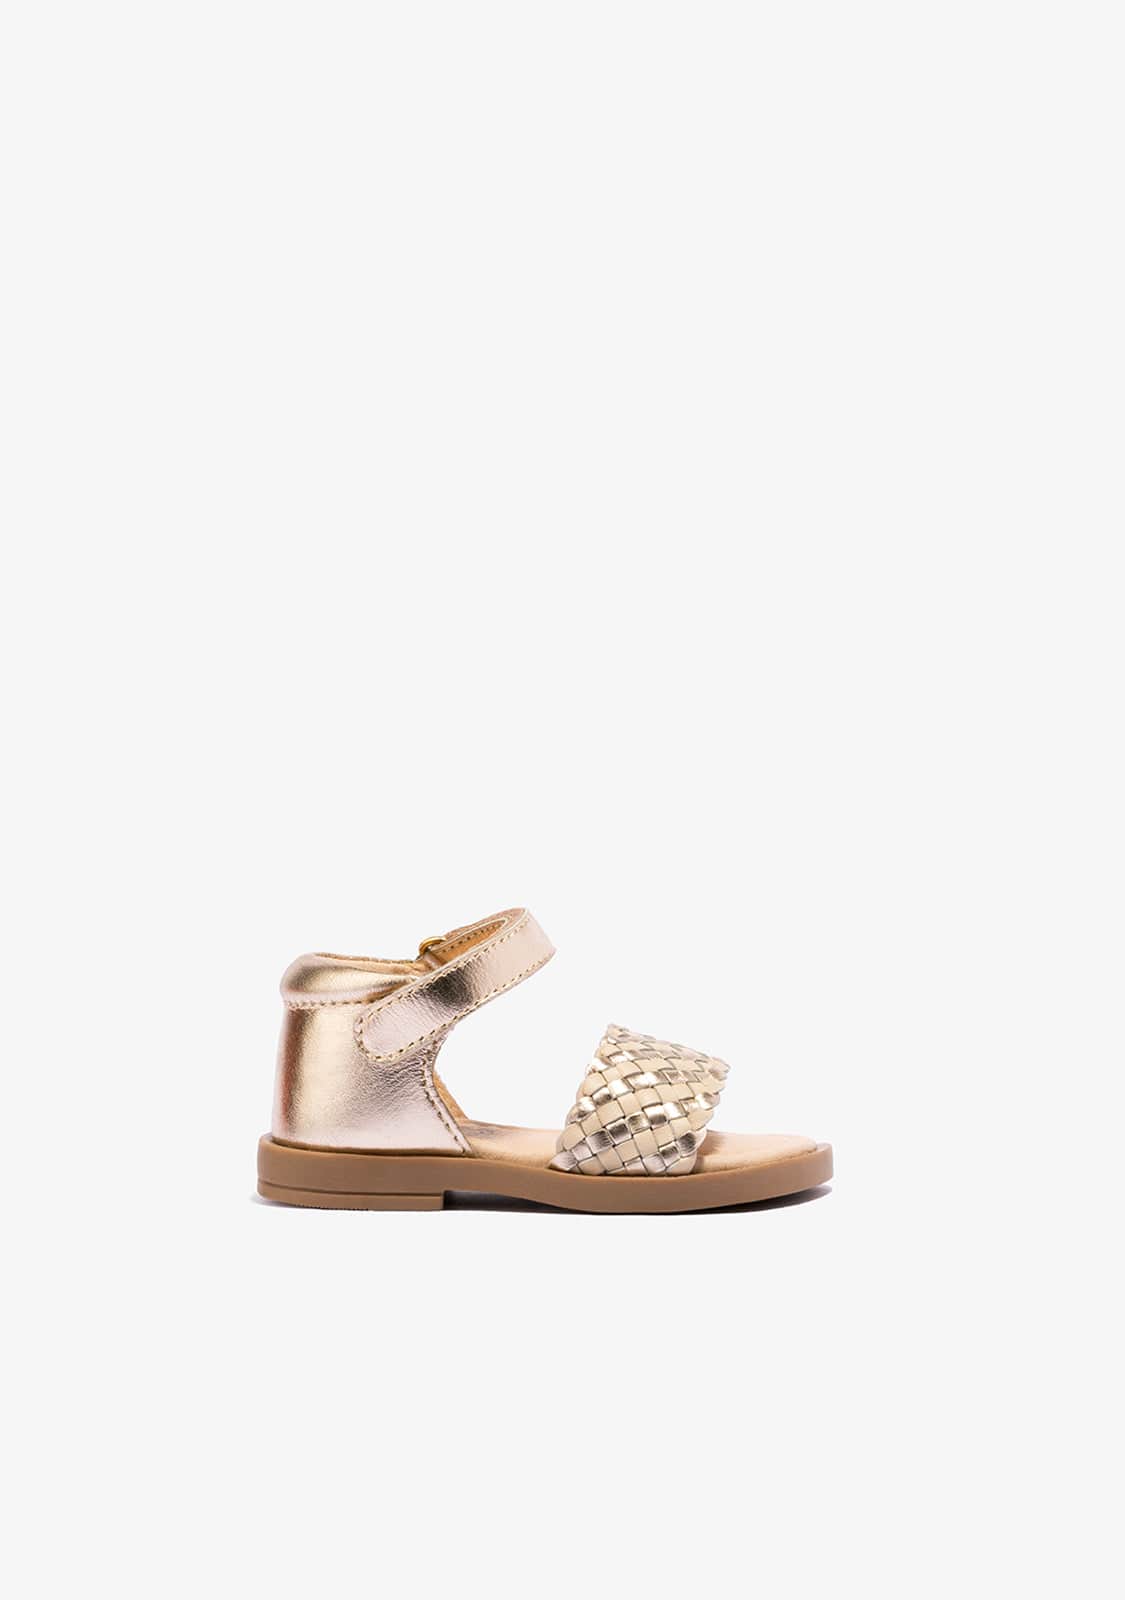 OSITO Shoes Baby's Gold Beige Sandals Napa